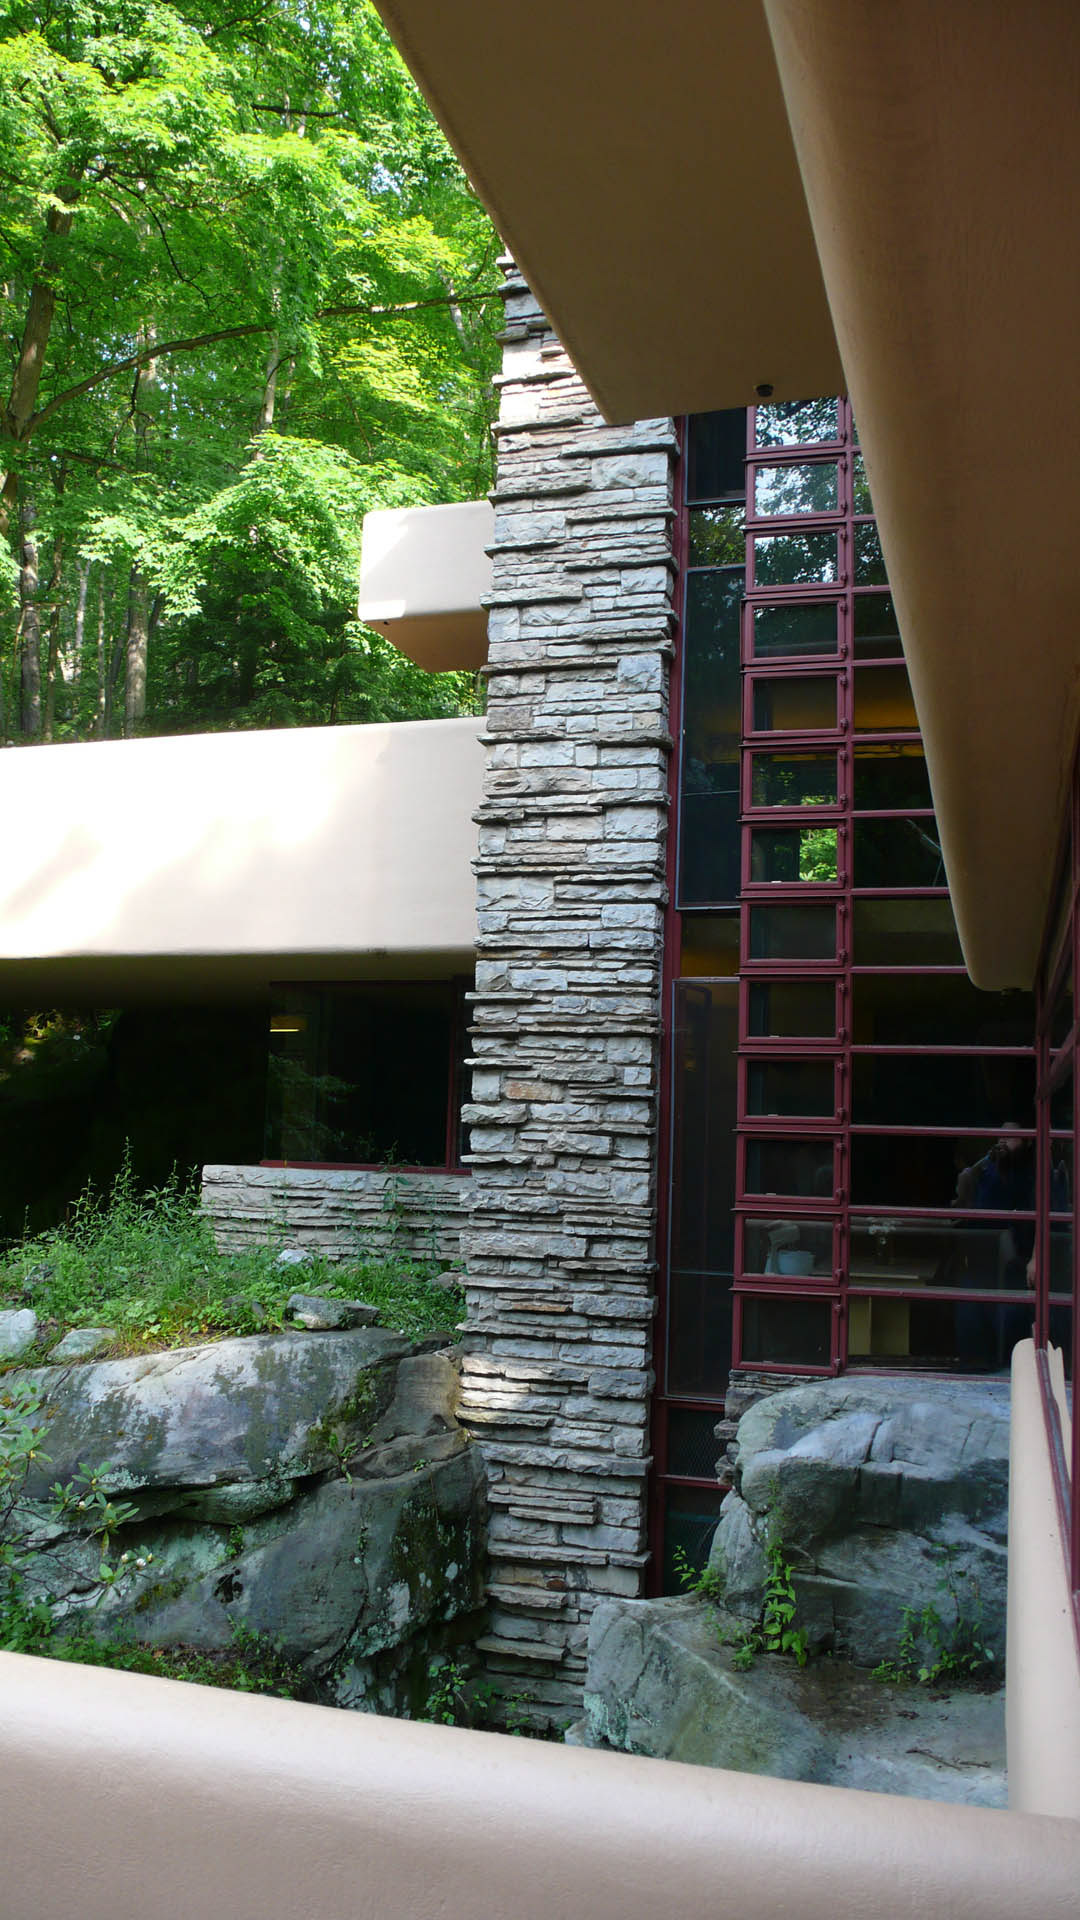 Fallingwater Frank Lloyd Wright Taliesin Taliesin West organic architecture Zero Energy House sustainable architecture green building